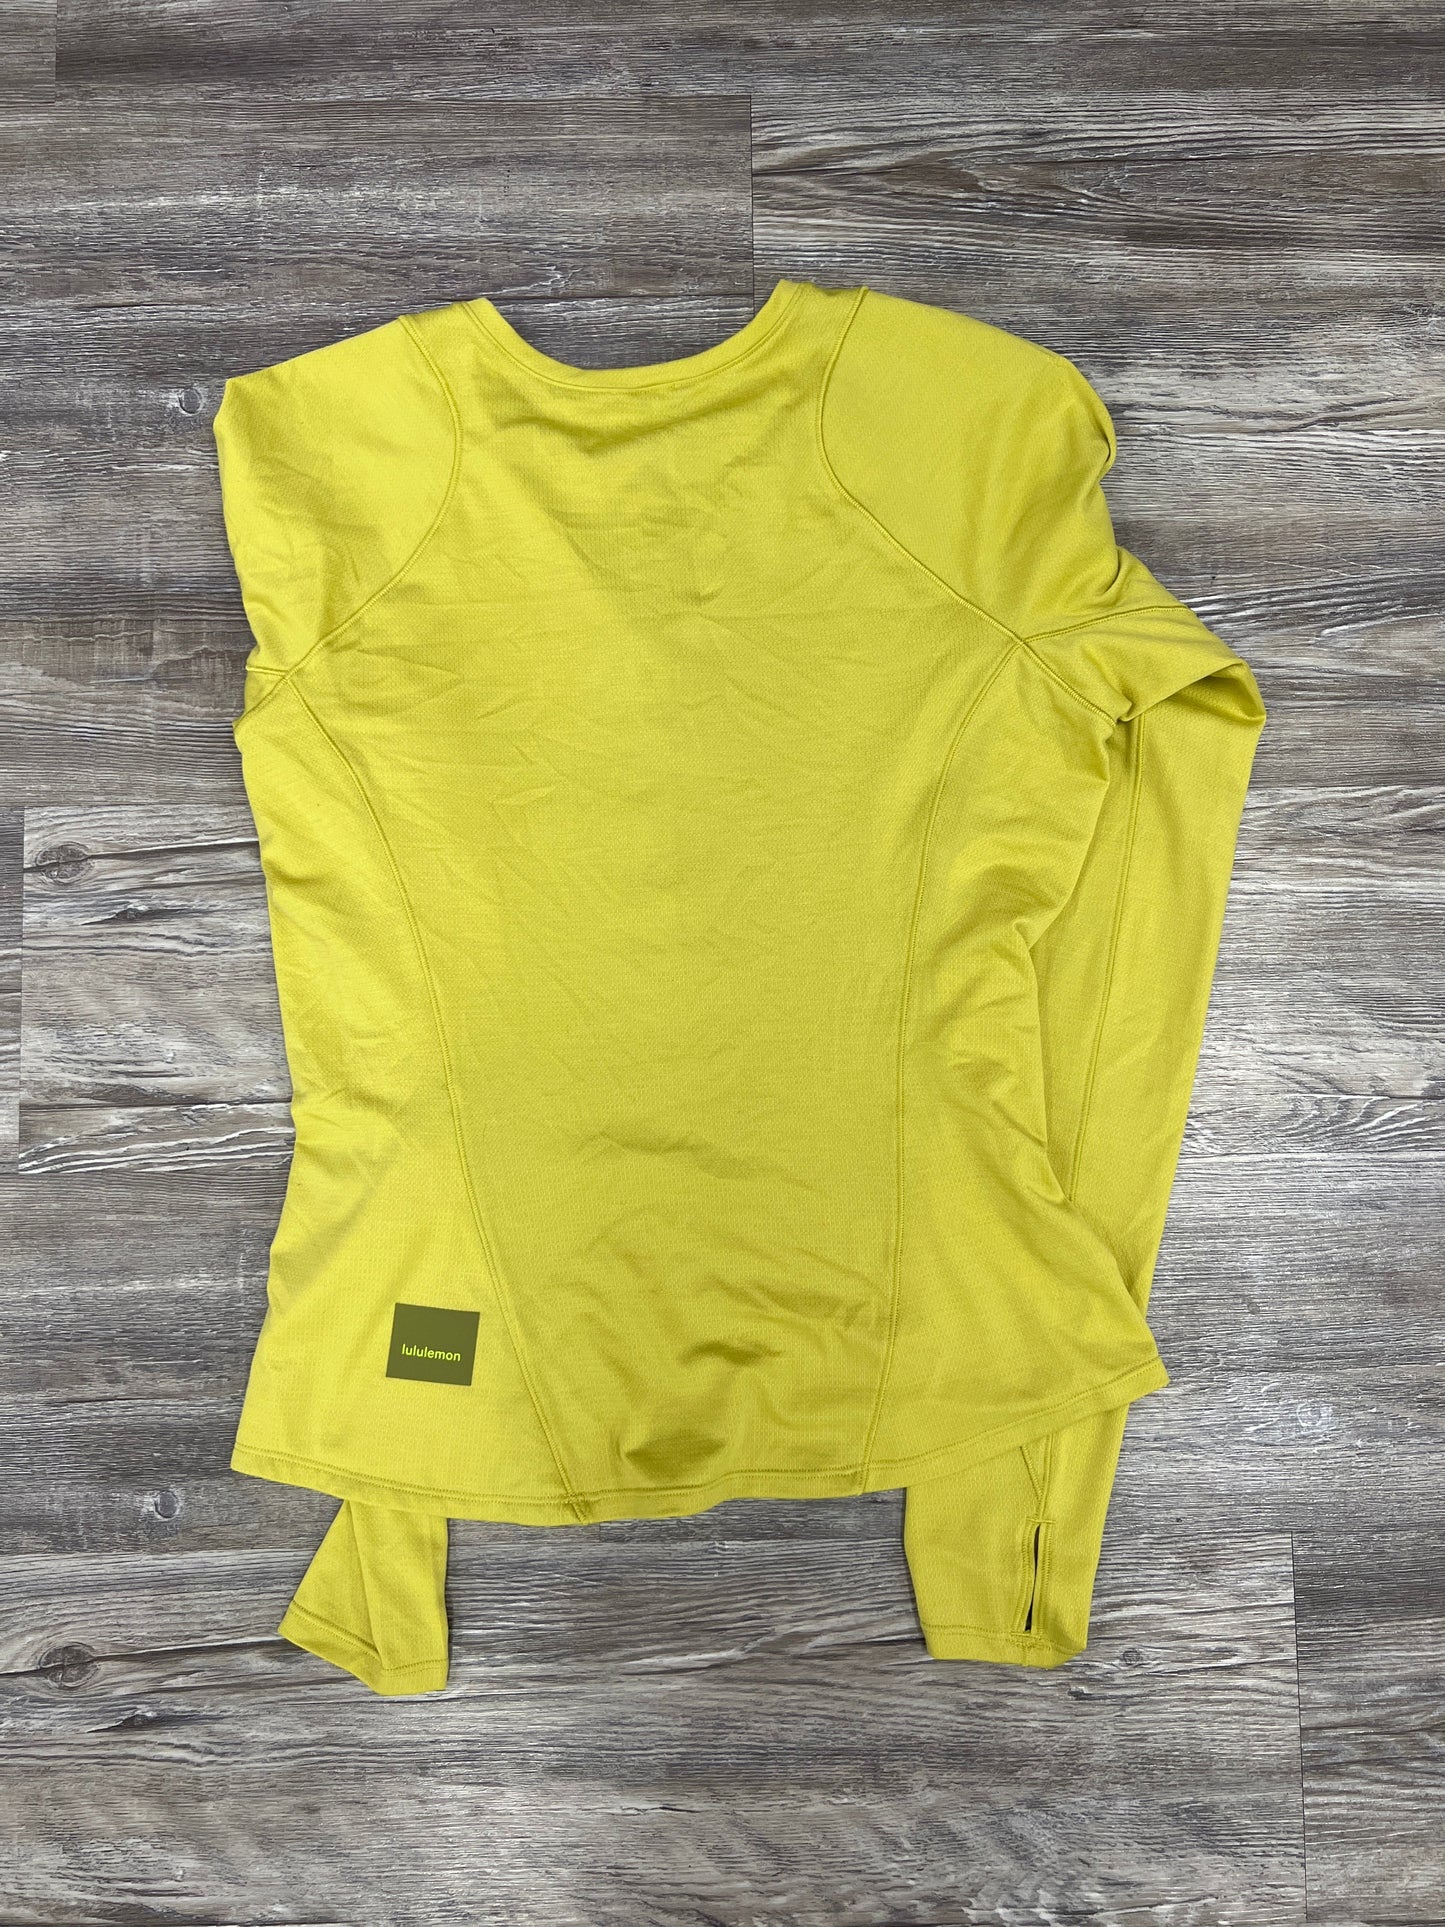 Chartreuse Athletic Top Long Sleeve Lululemon, Size S